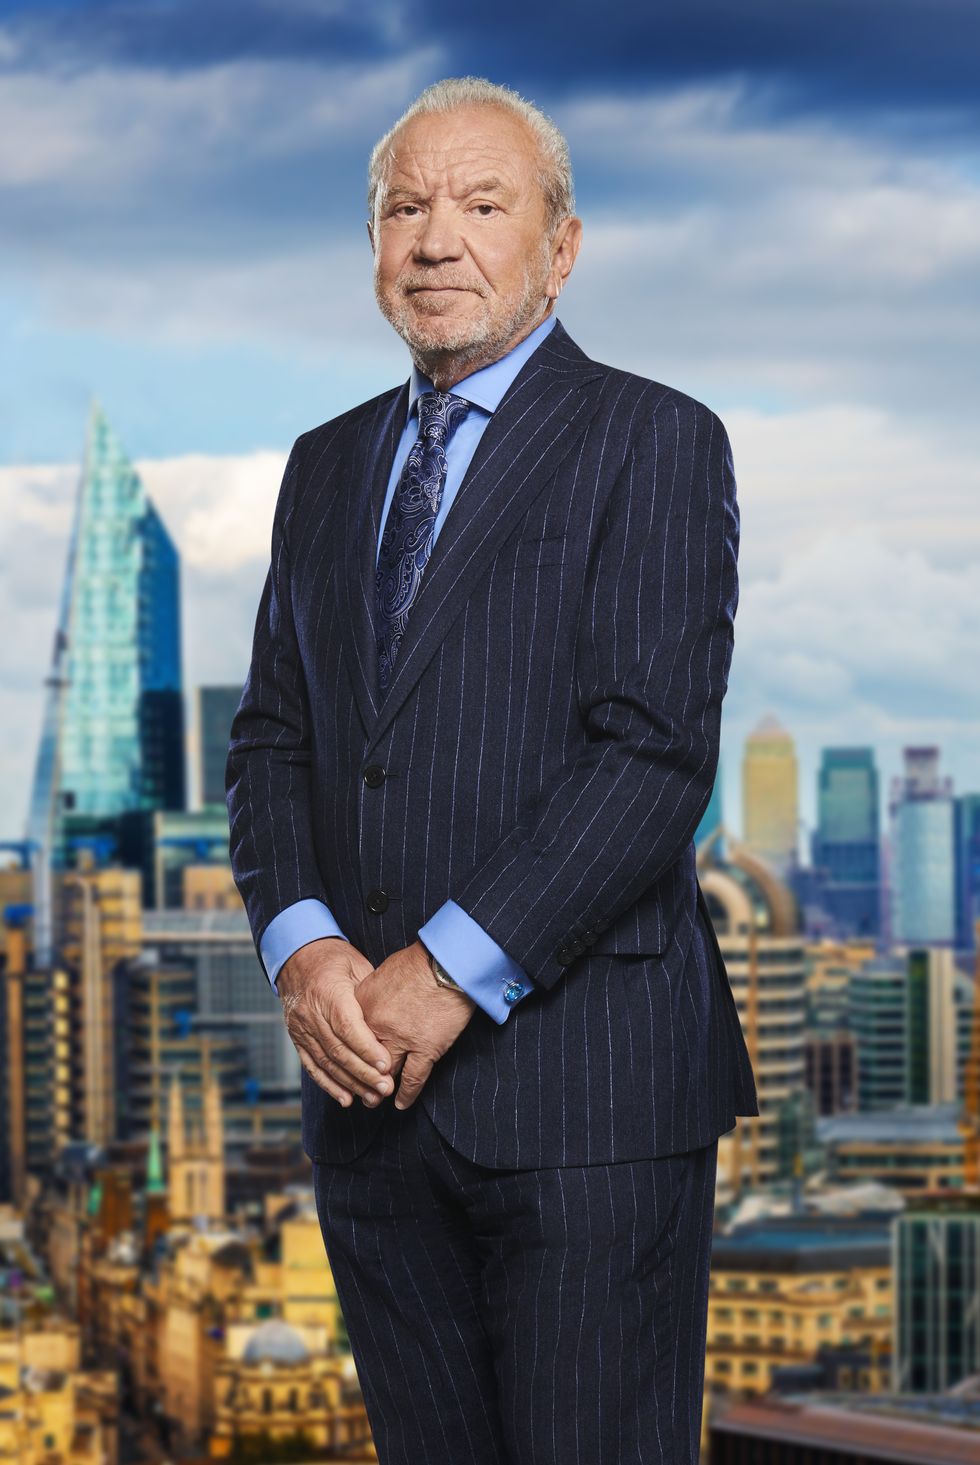 lord sugar, the appentice